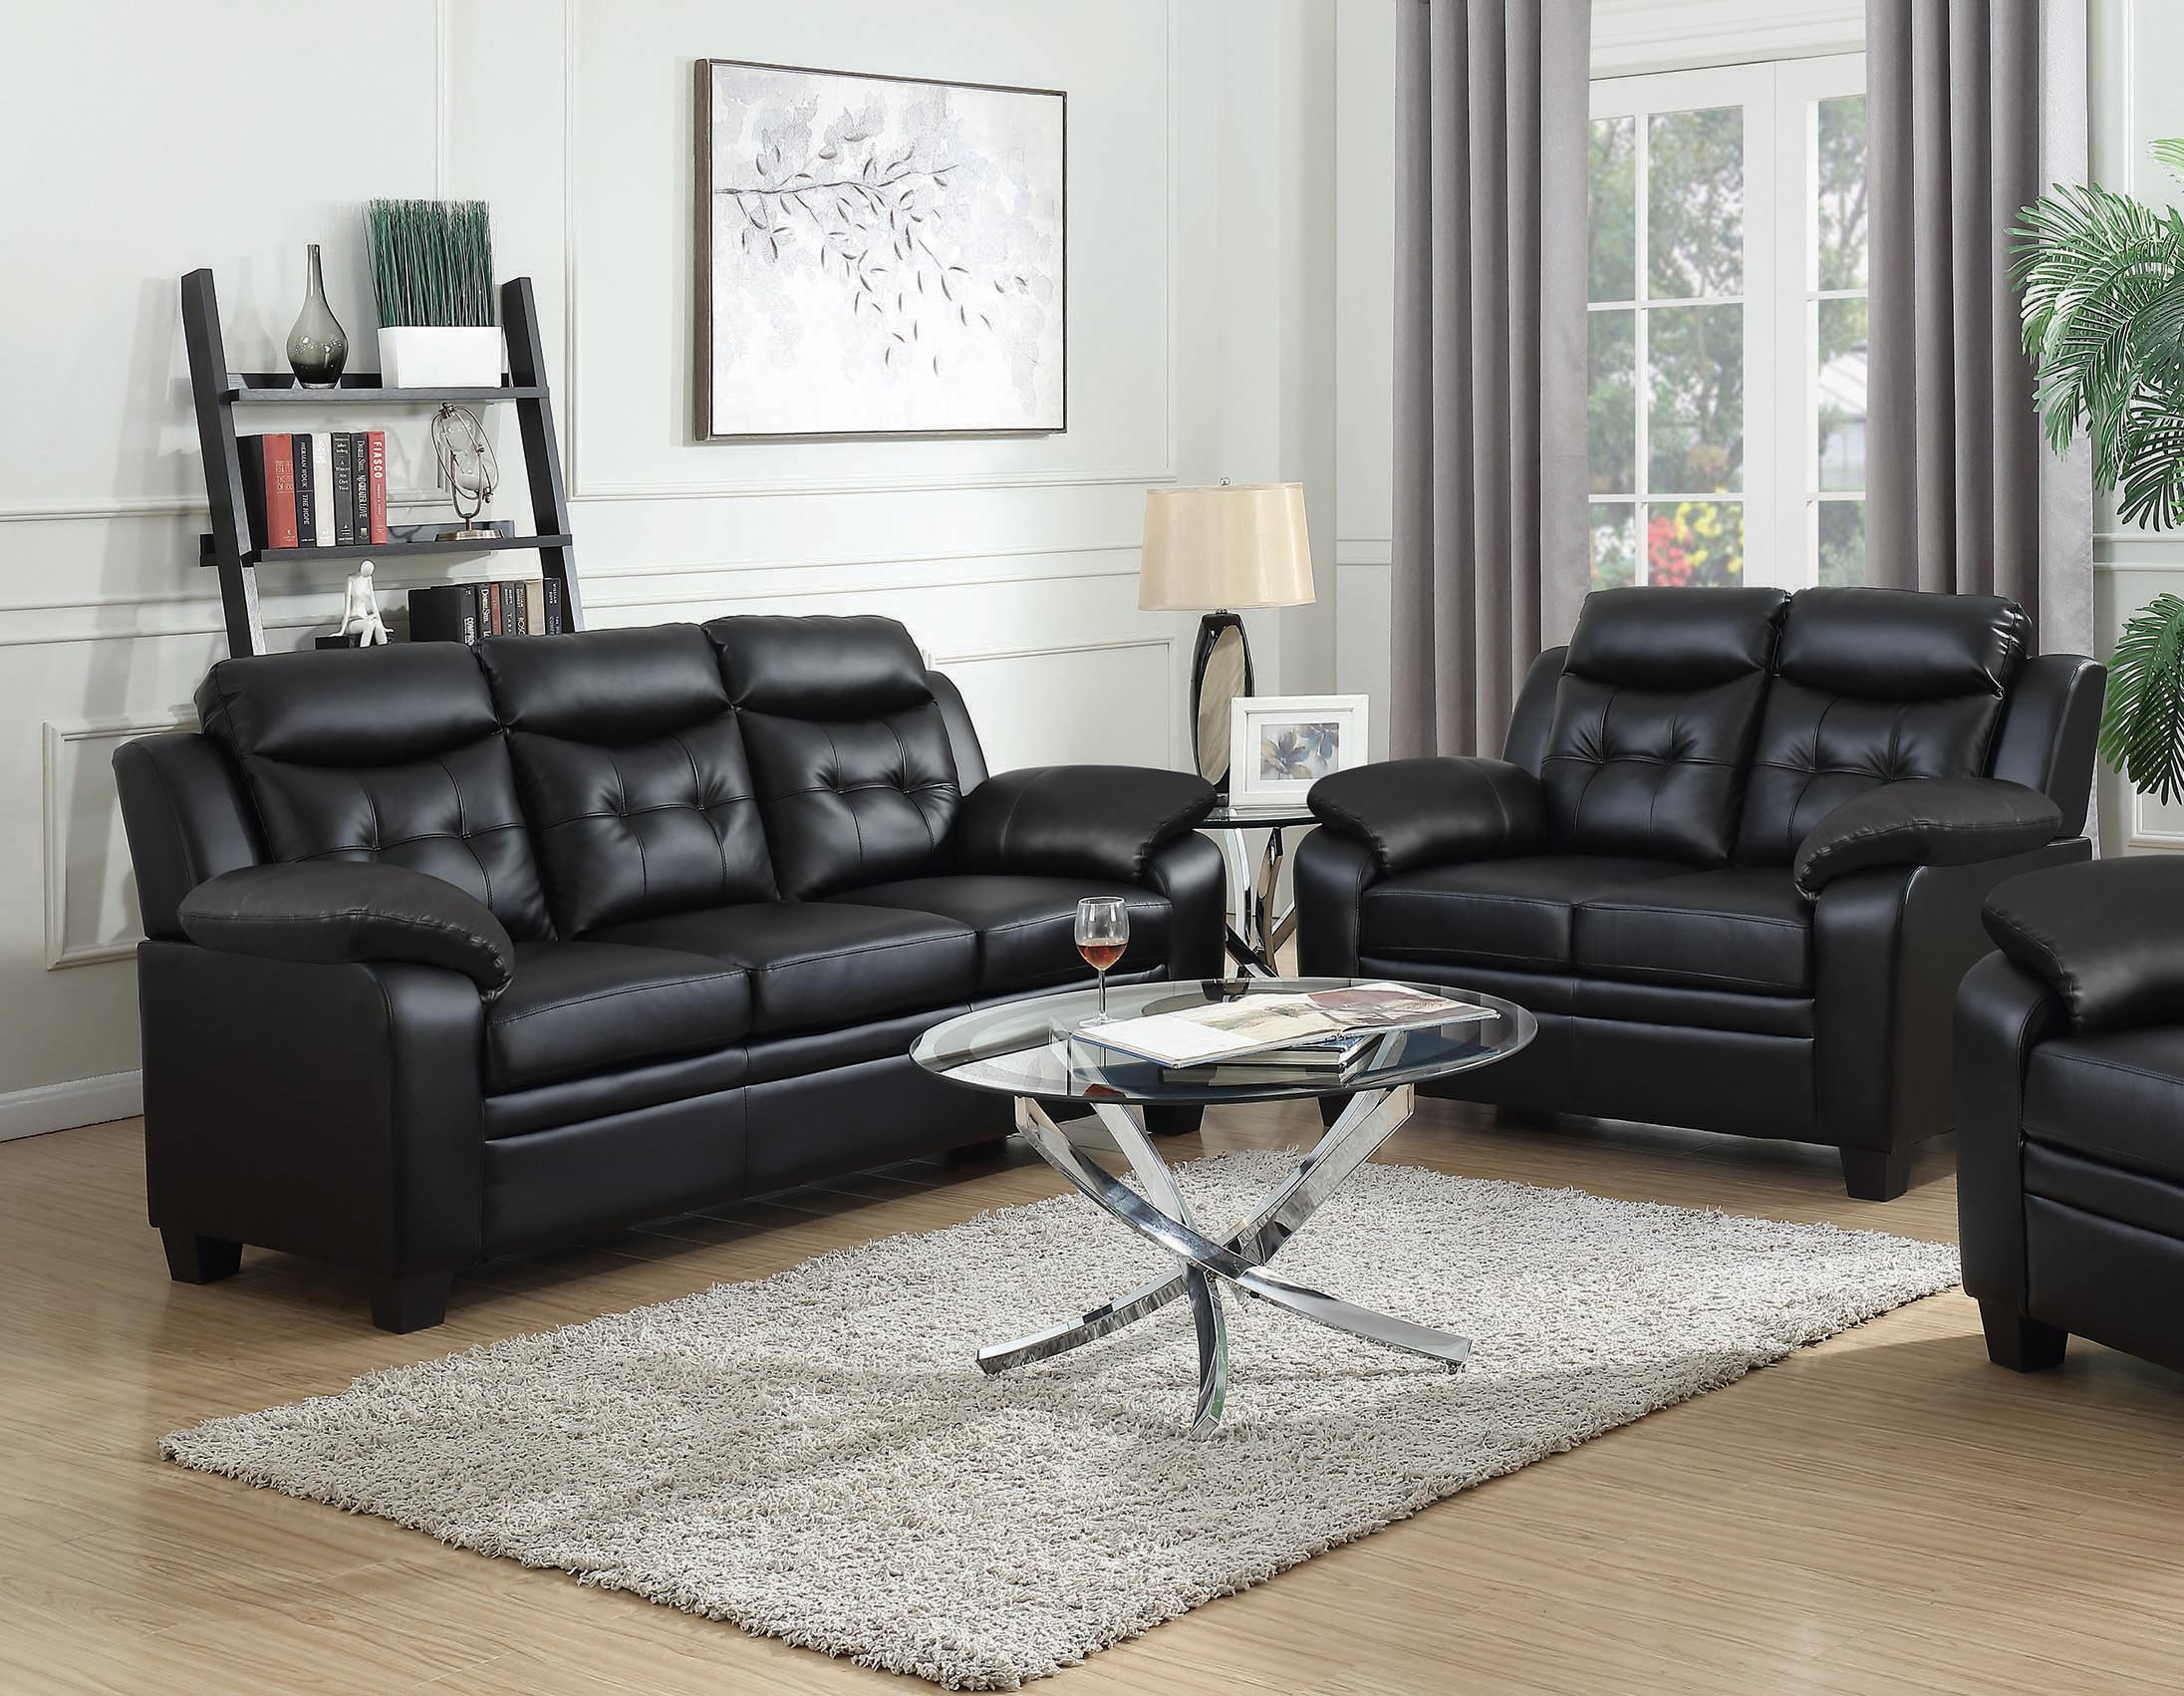 Transitional Living Room Set 506551-S2 Finley 506551-S2 in Black Leatherette